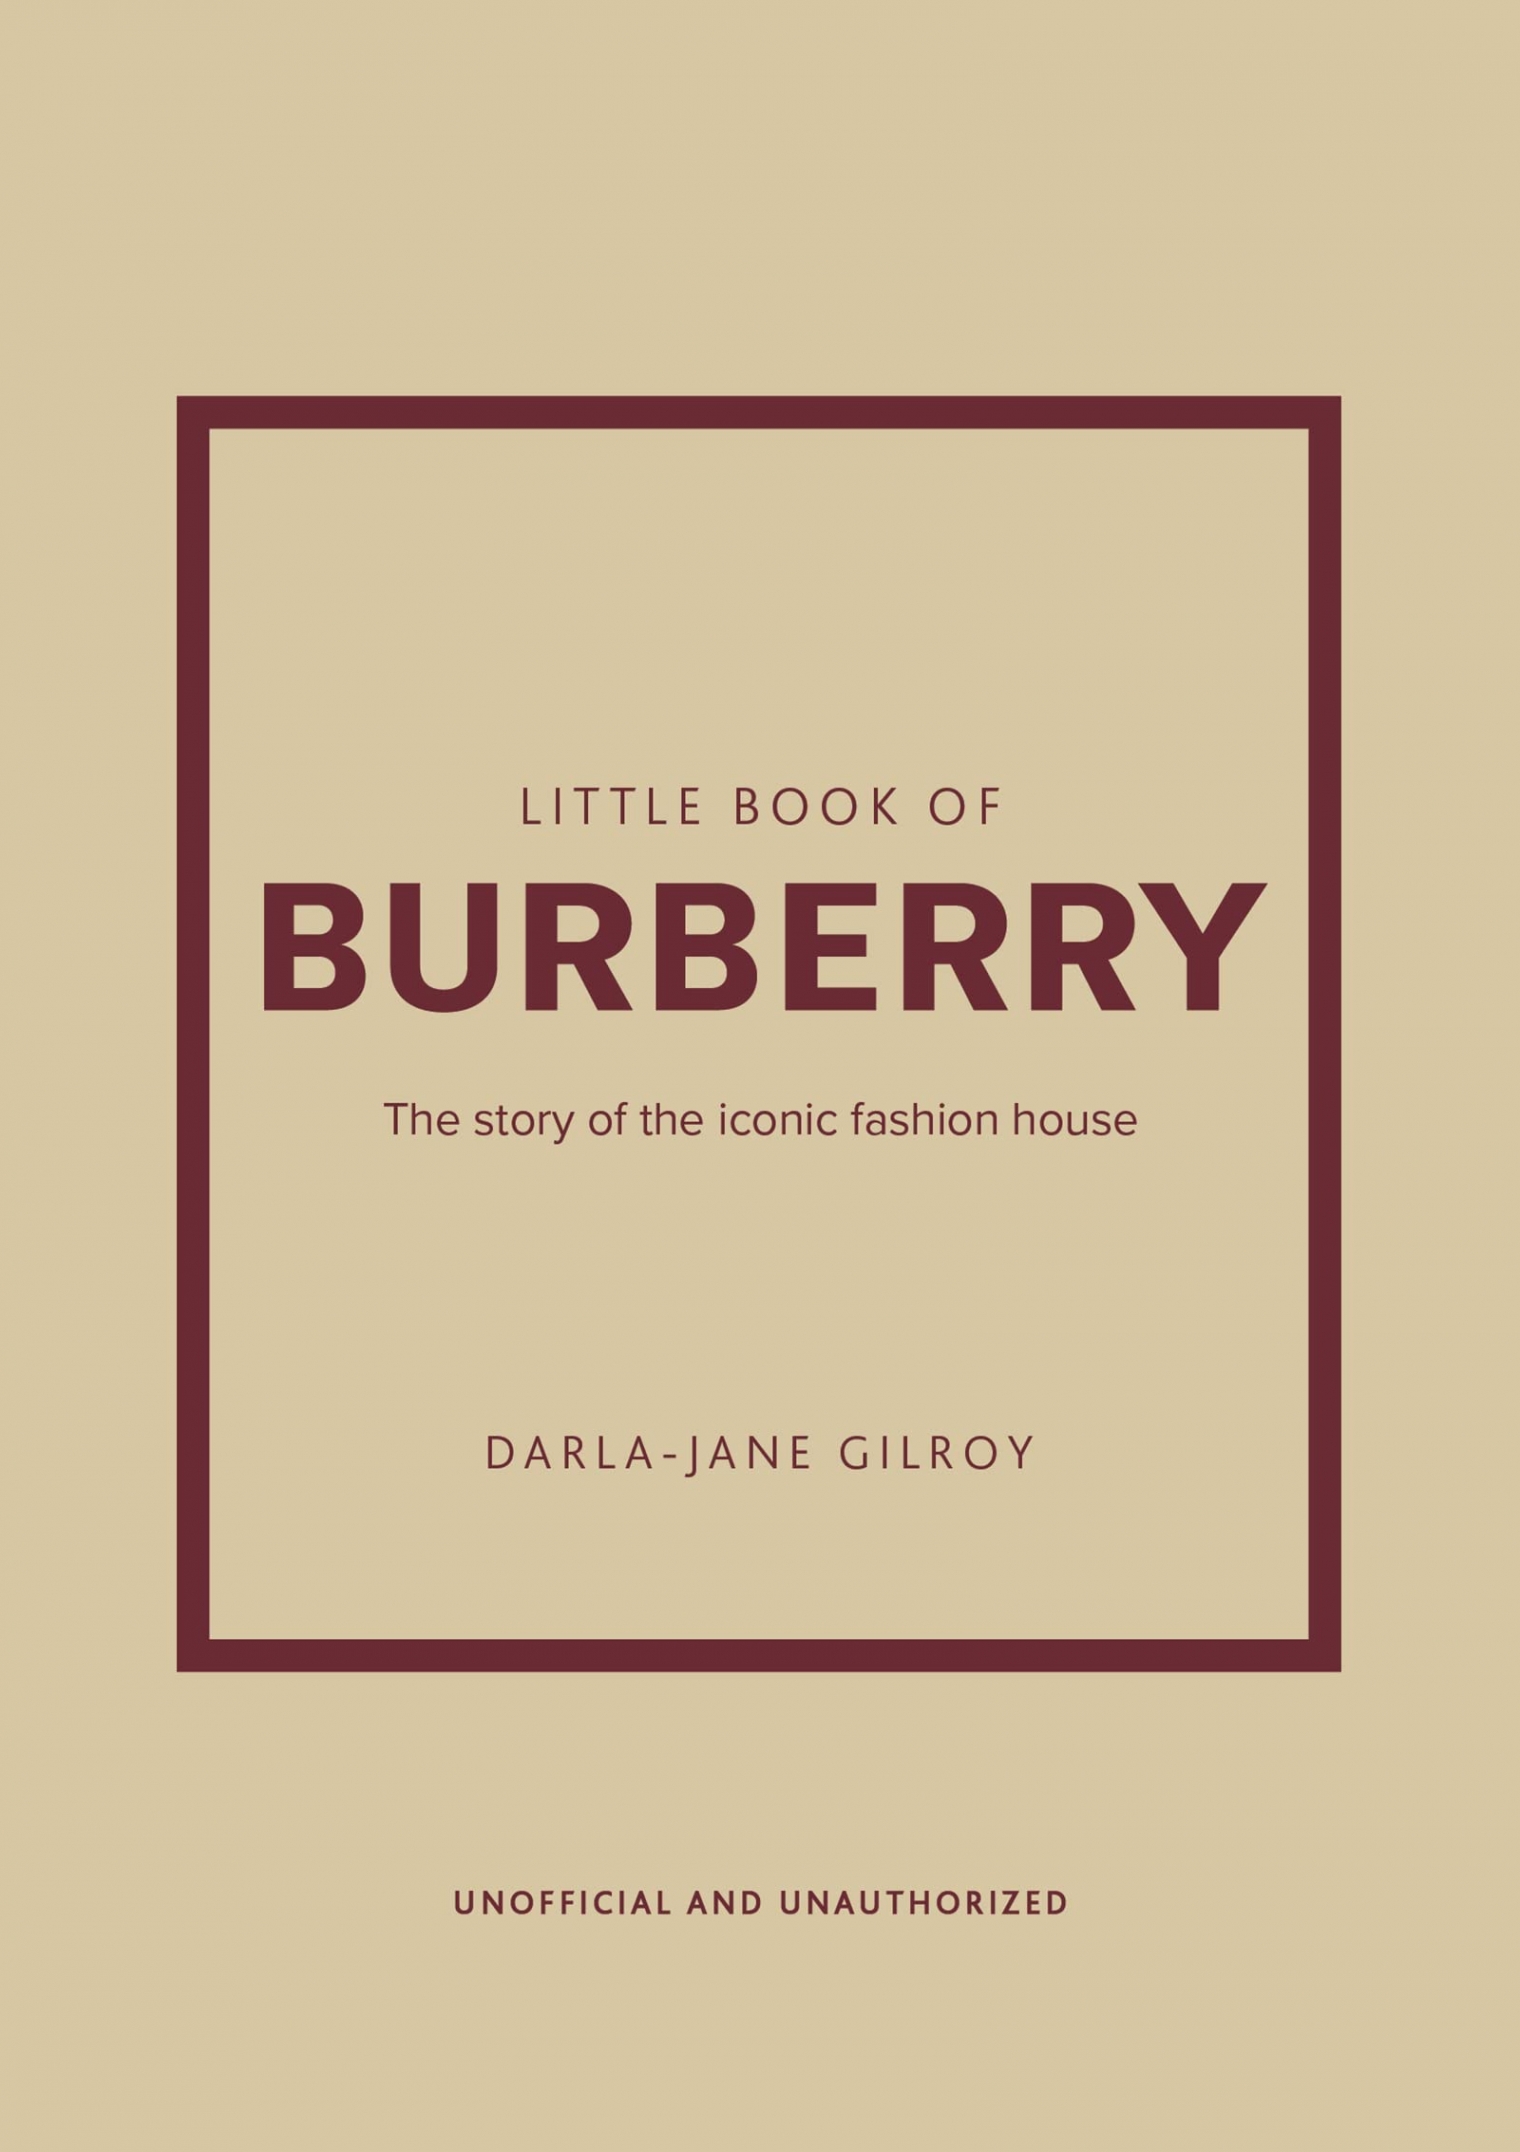 Gilroy, Darla-jane Little Book of Burberry : The Story of the Iconic Fashion House 